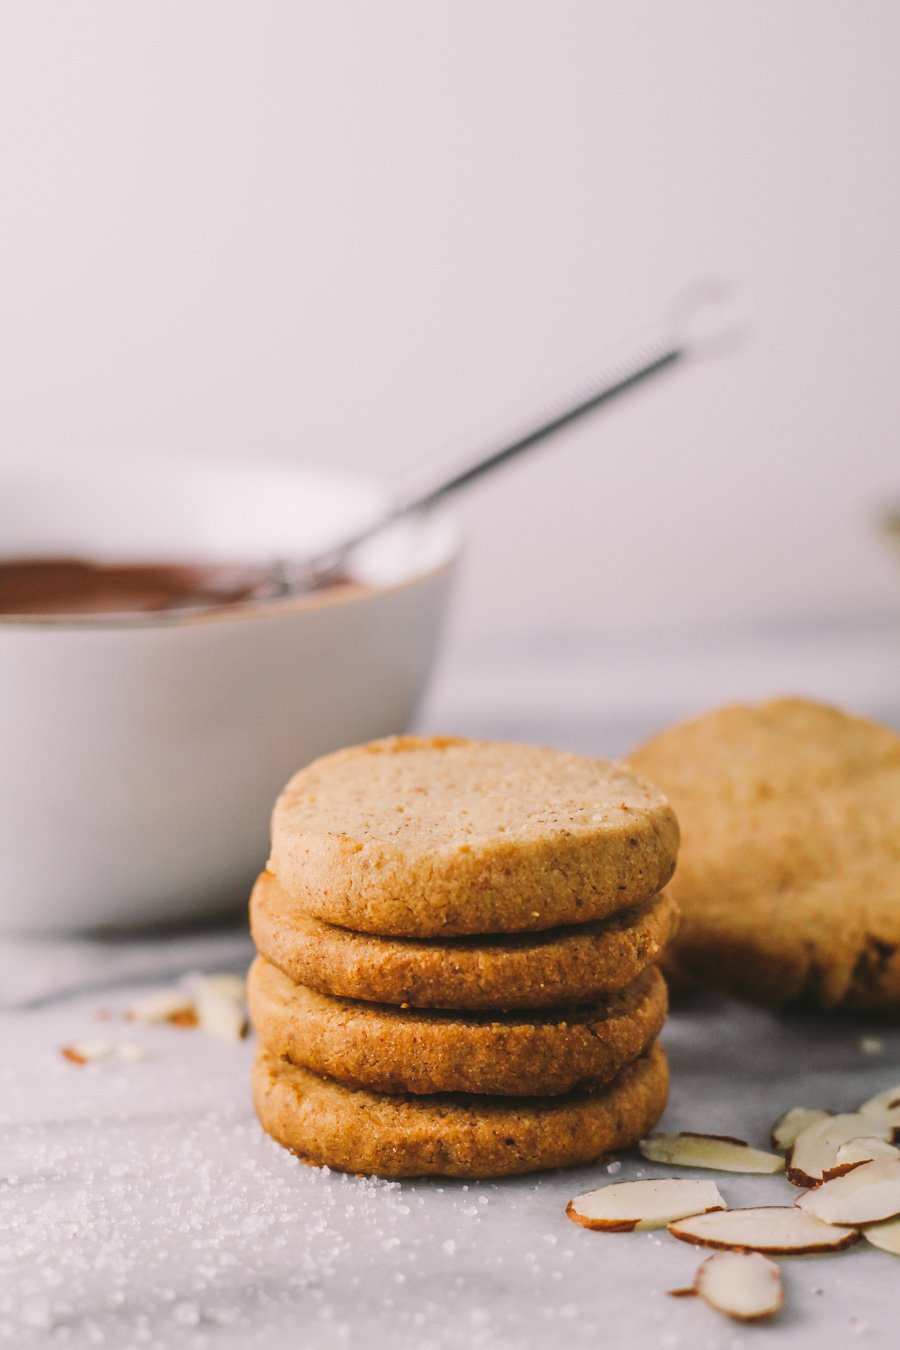 almond butter shortbread cookies | via plays well with butter | a flaky & tender almond butter shortbread that is delicious enough to be enjoyed on their own, but also subtle & versatile enough to be finished with either a dunk of dark chocolate & sprinkle of fleur de sel or sandwiched around a sweet almond butter buttercream (or both!)